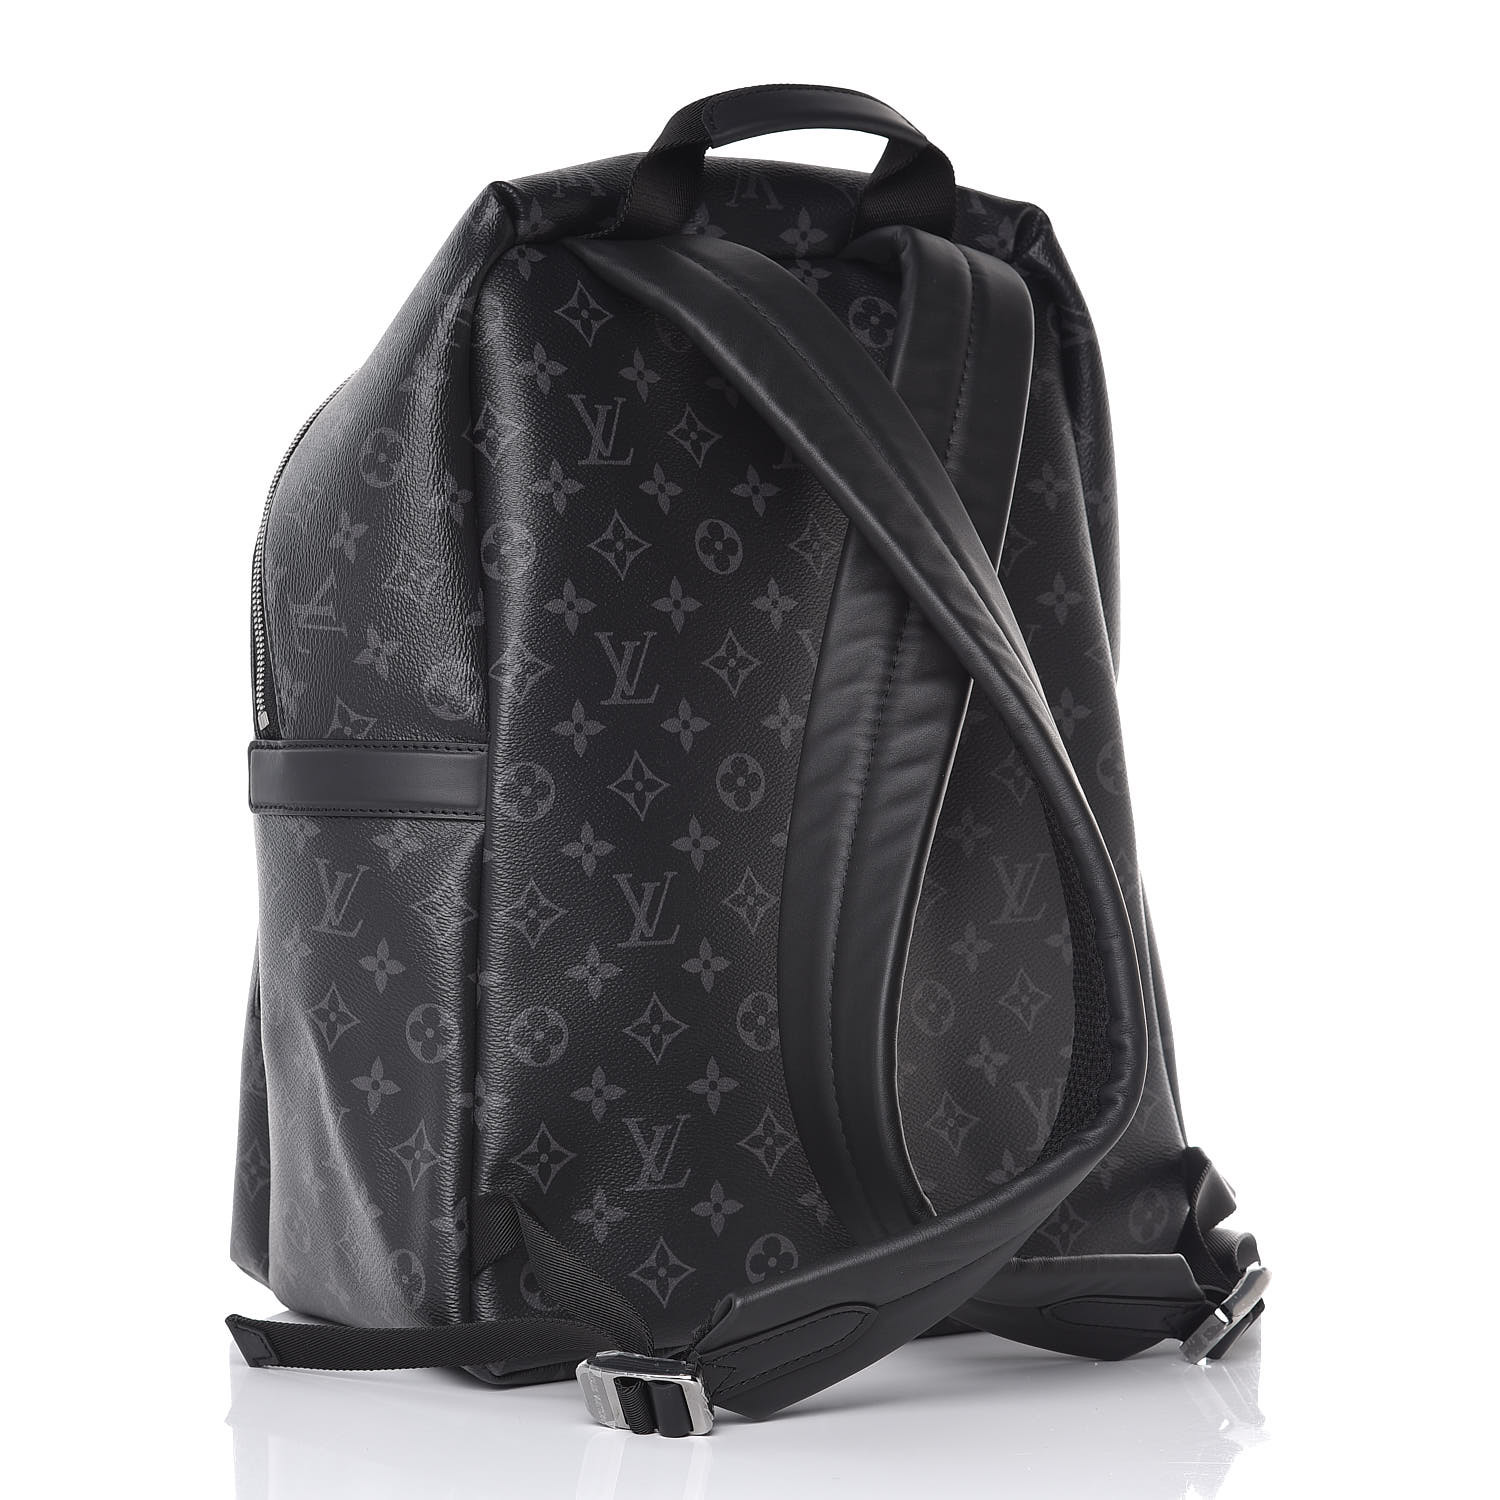 Louis Vuitton Discovery Backpack Pm Price In India | semashow.com